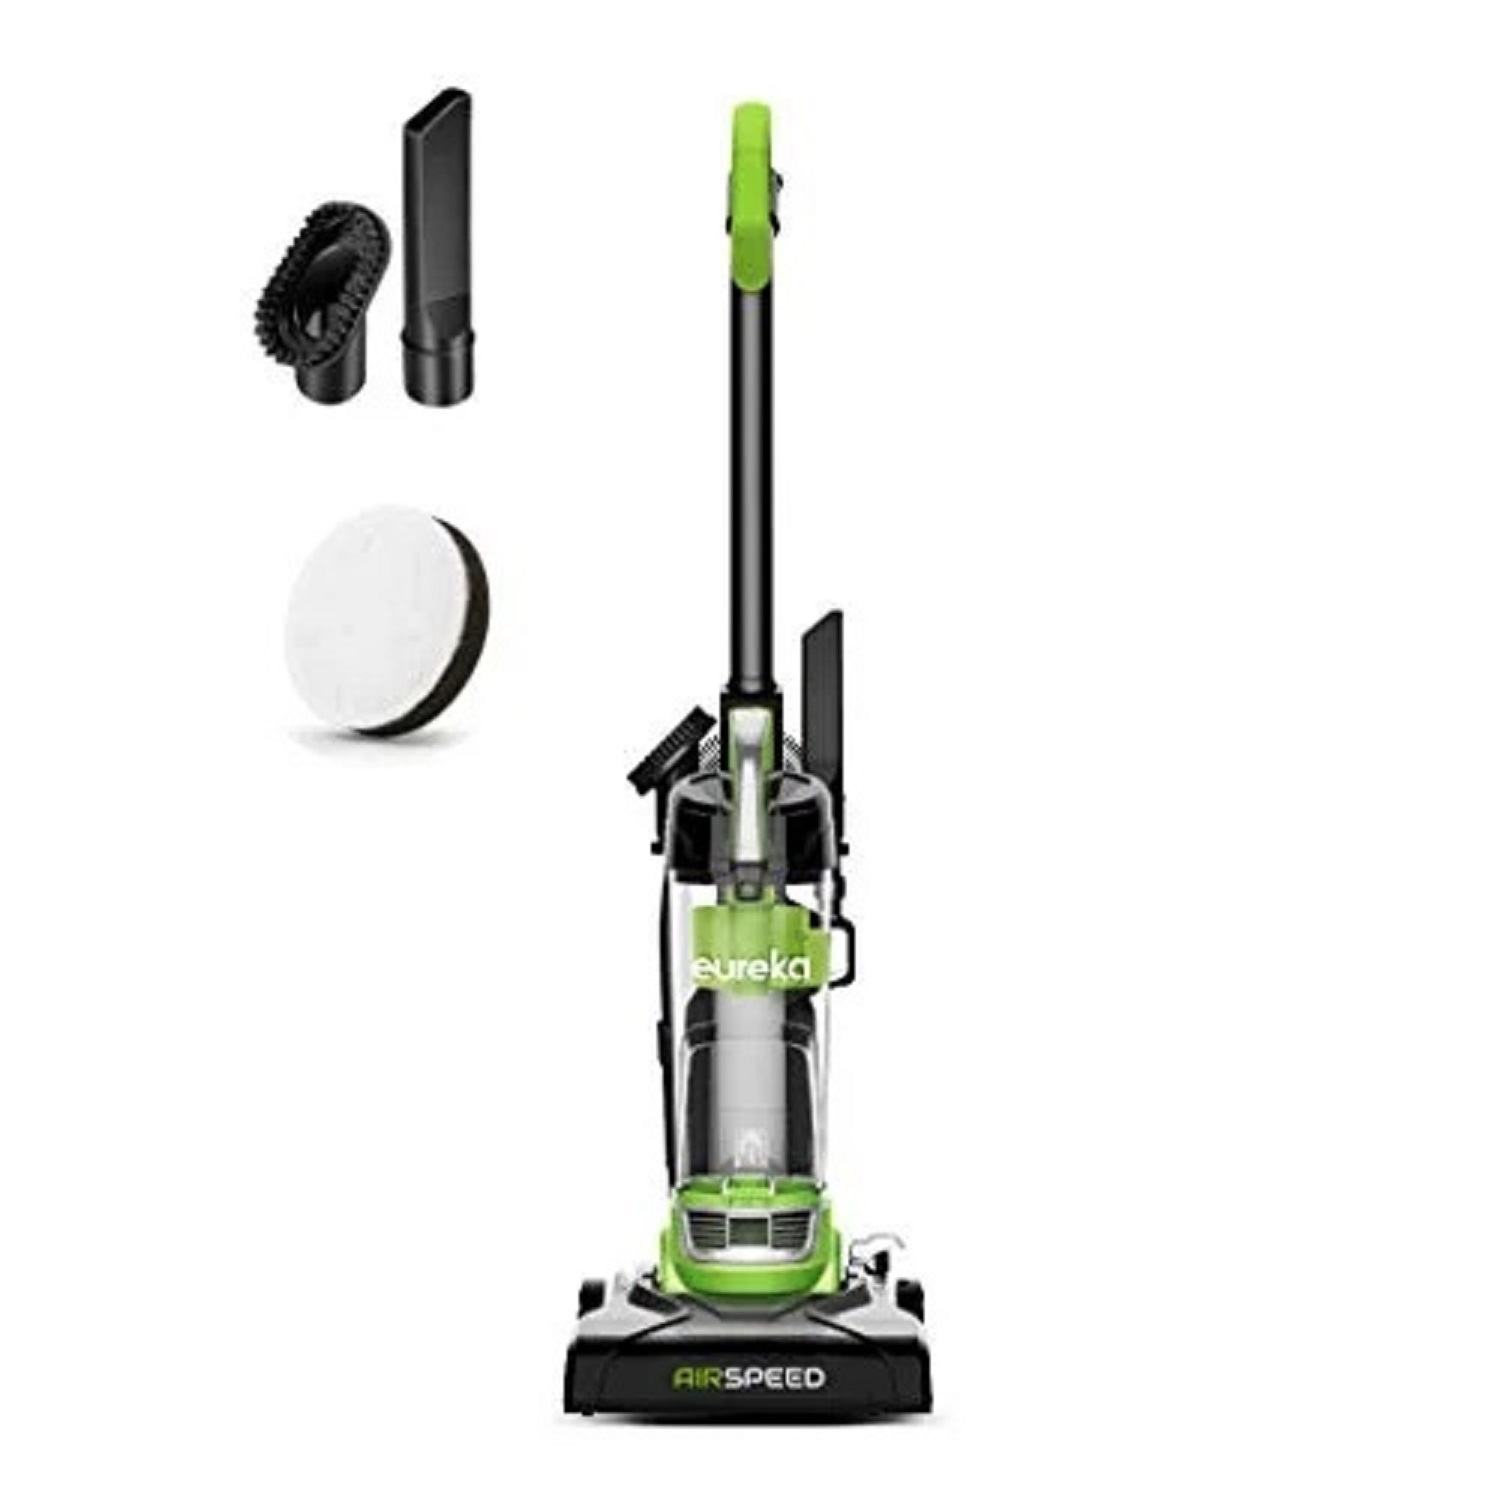 Eureka Airspeed Ultra-Lightweight Compact Bagless Upright Vacuum Cleaner, - image 1 of 2